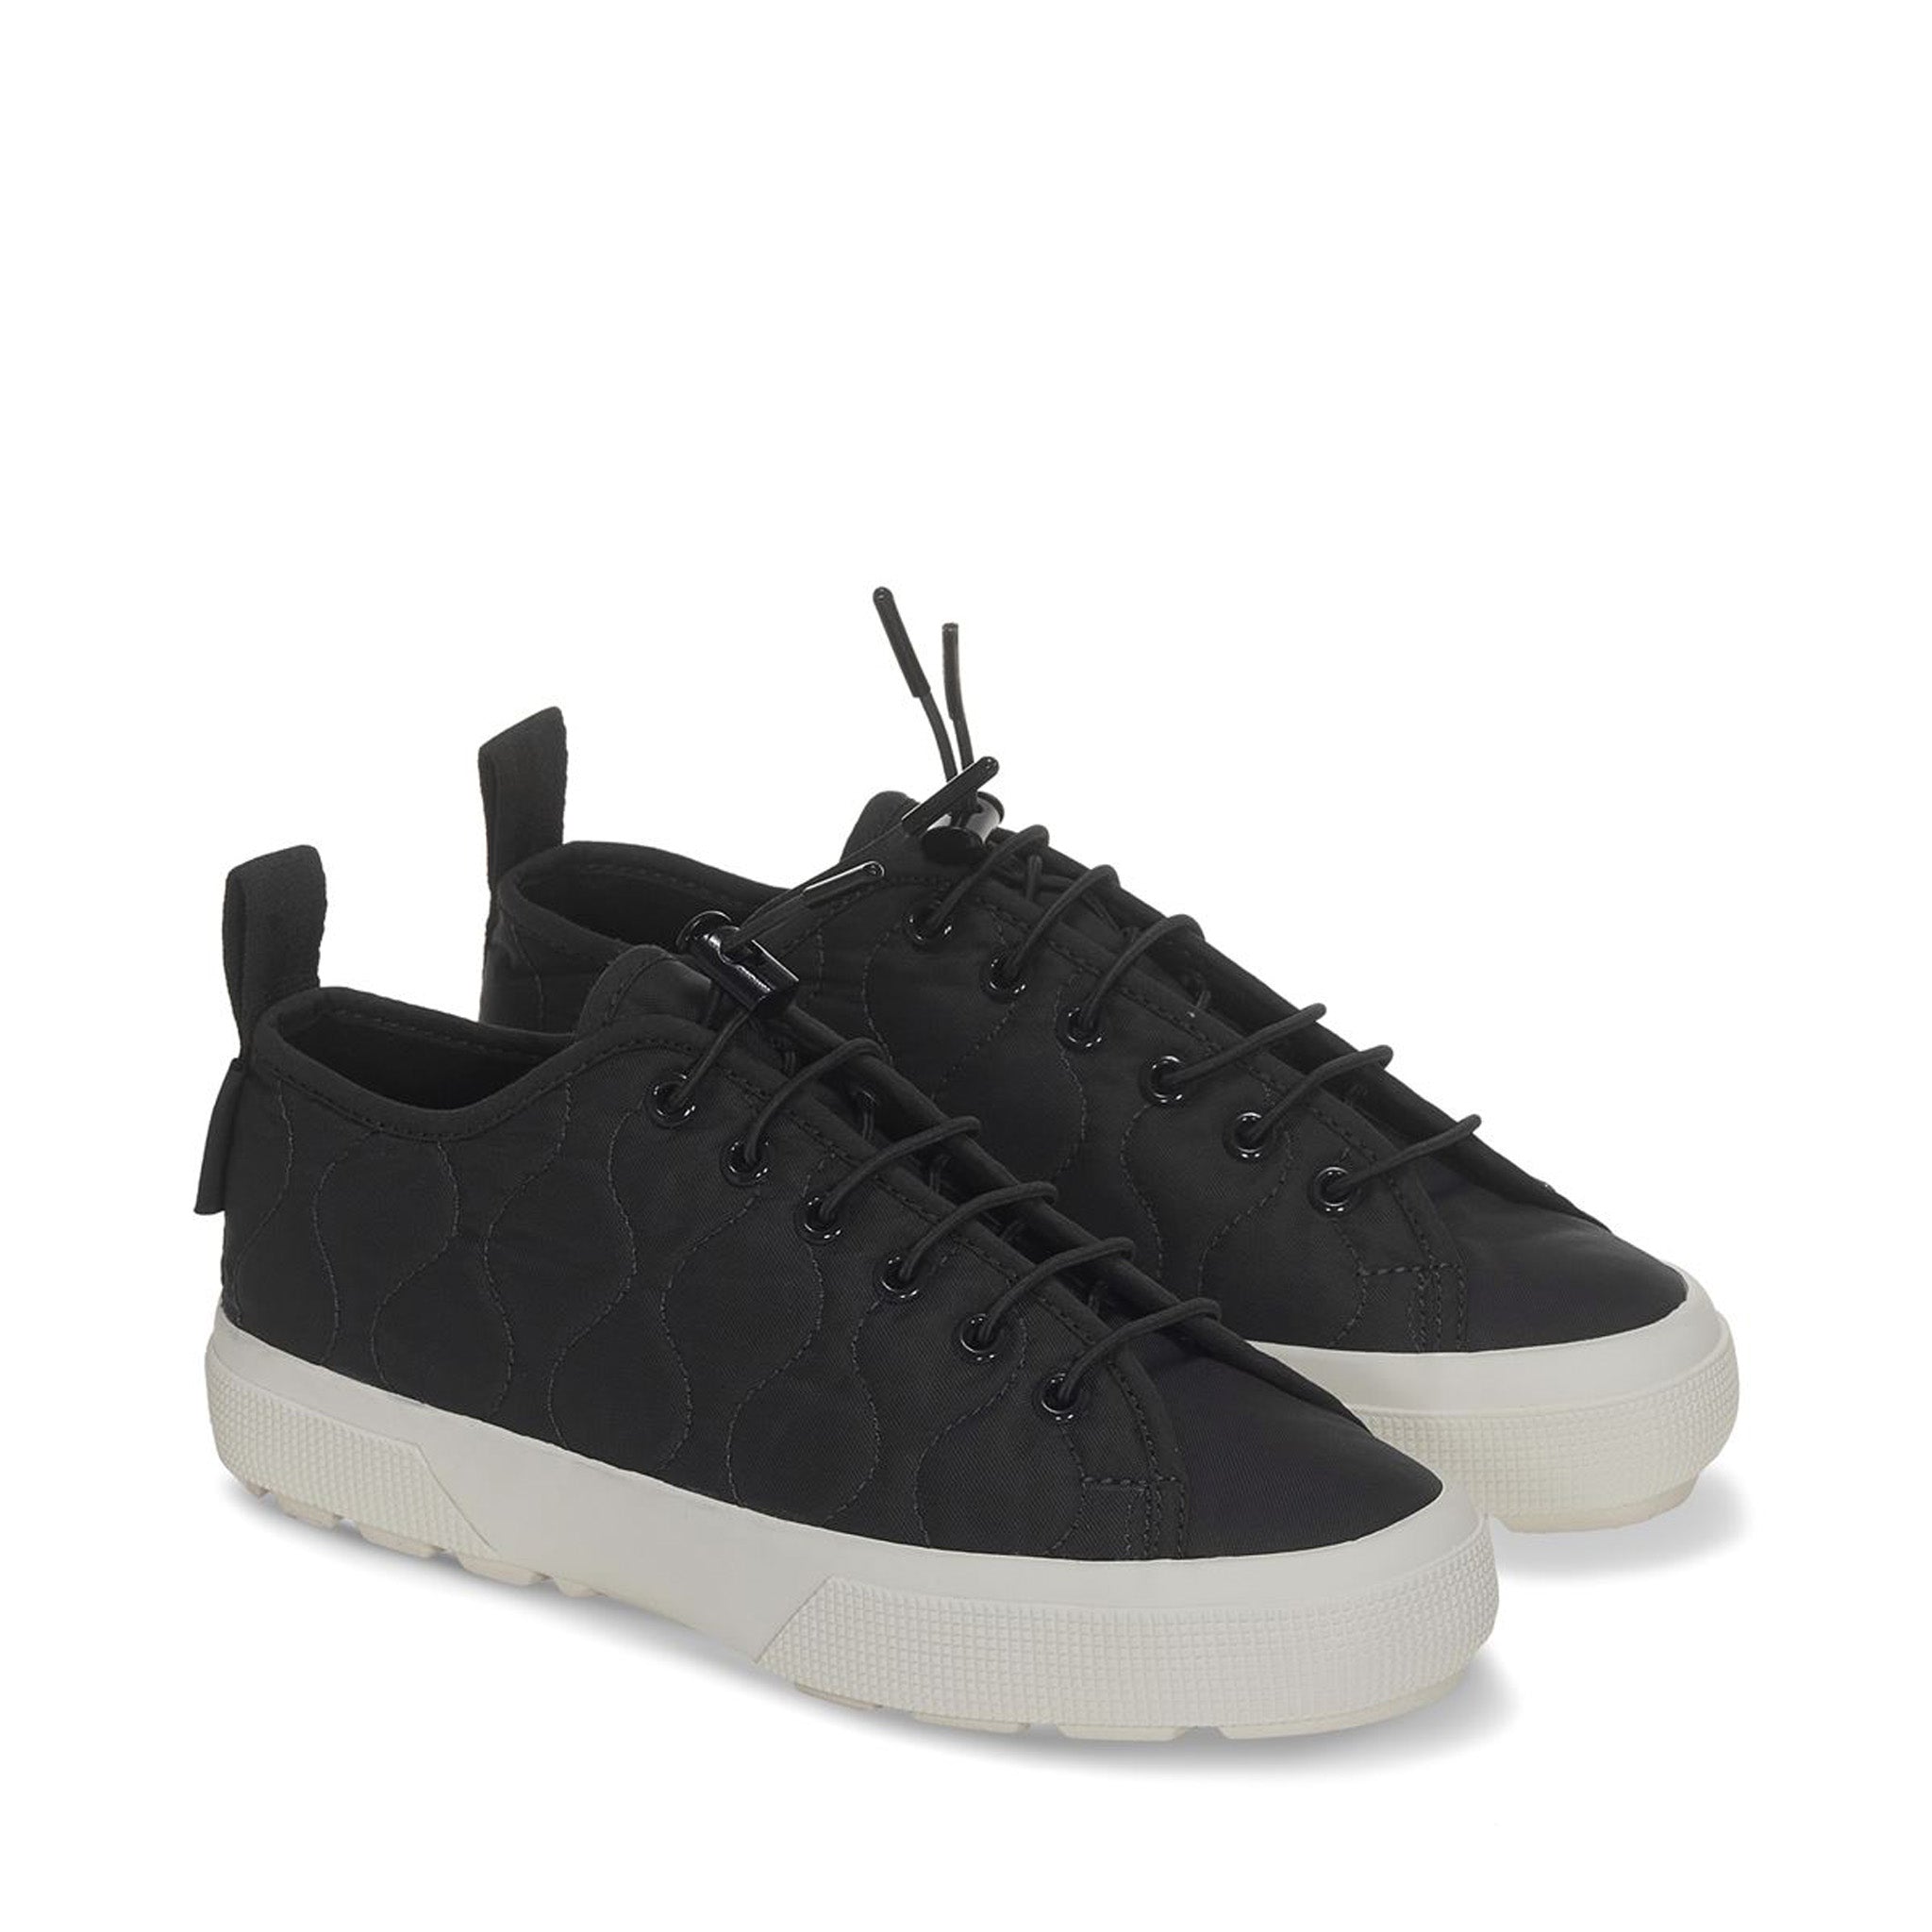 2625 Tank Quilted Nylon Sneakers - Black Bristol Avorio. Front view.